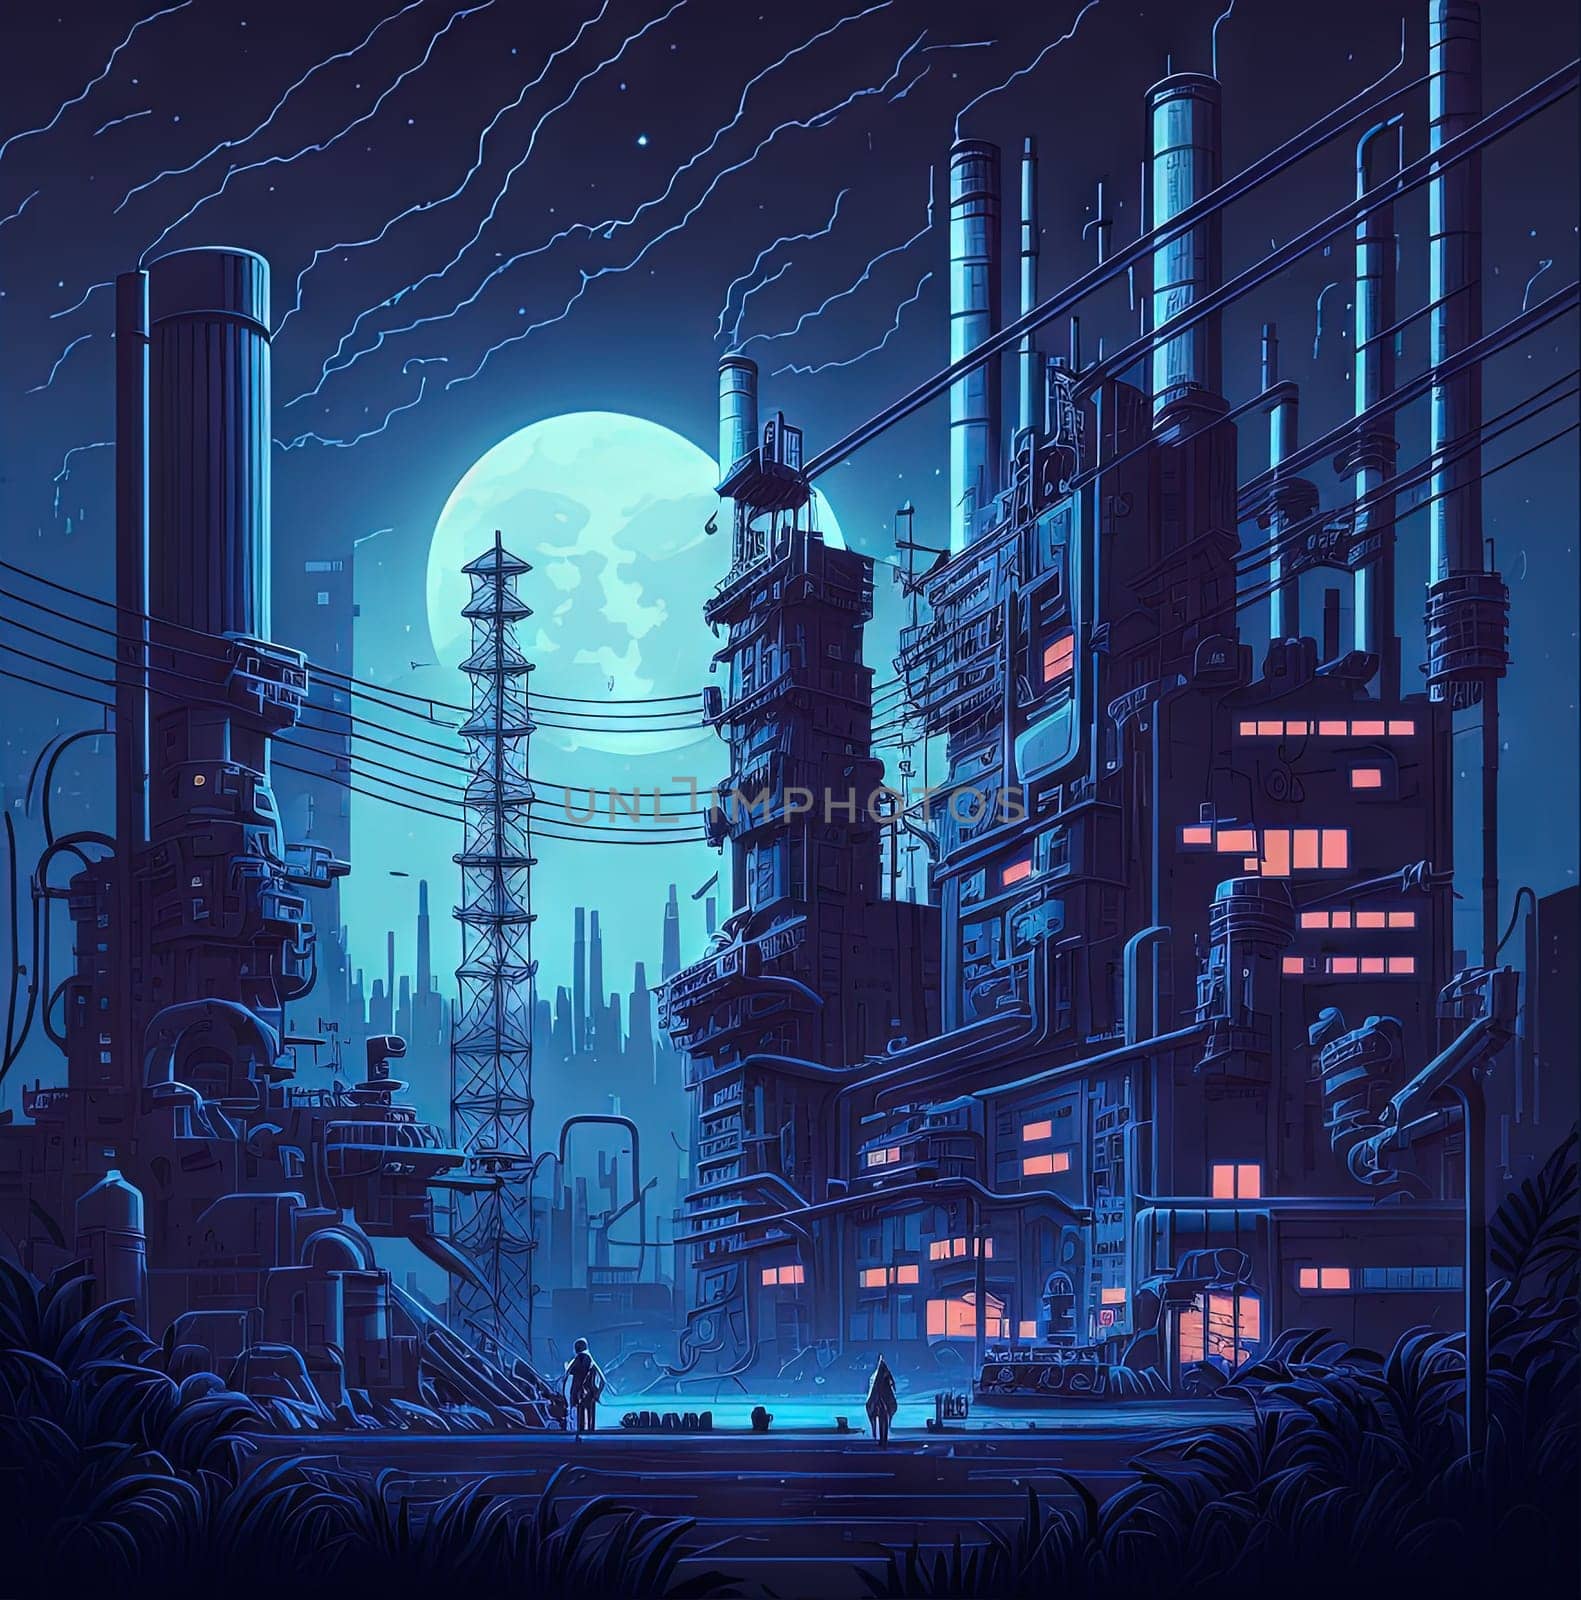 Retro game landscape in 80s style with industrial city district, neon lights and synthwave pixel graphics. Generated AI. by SwillKch